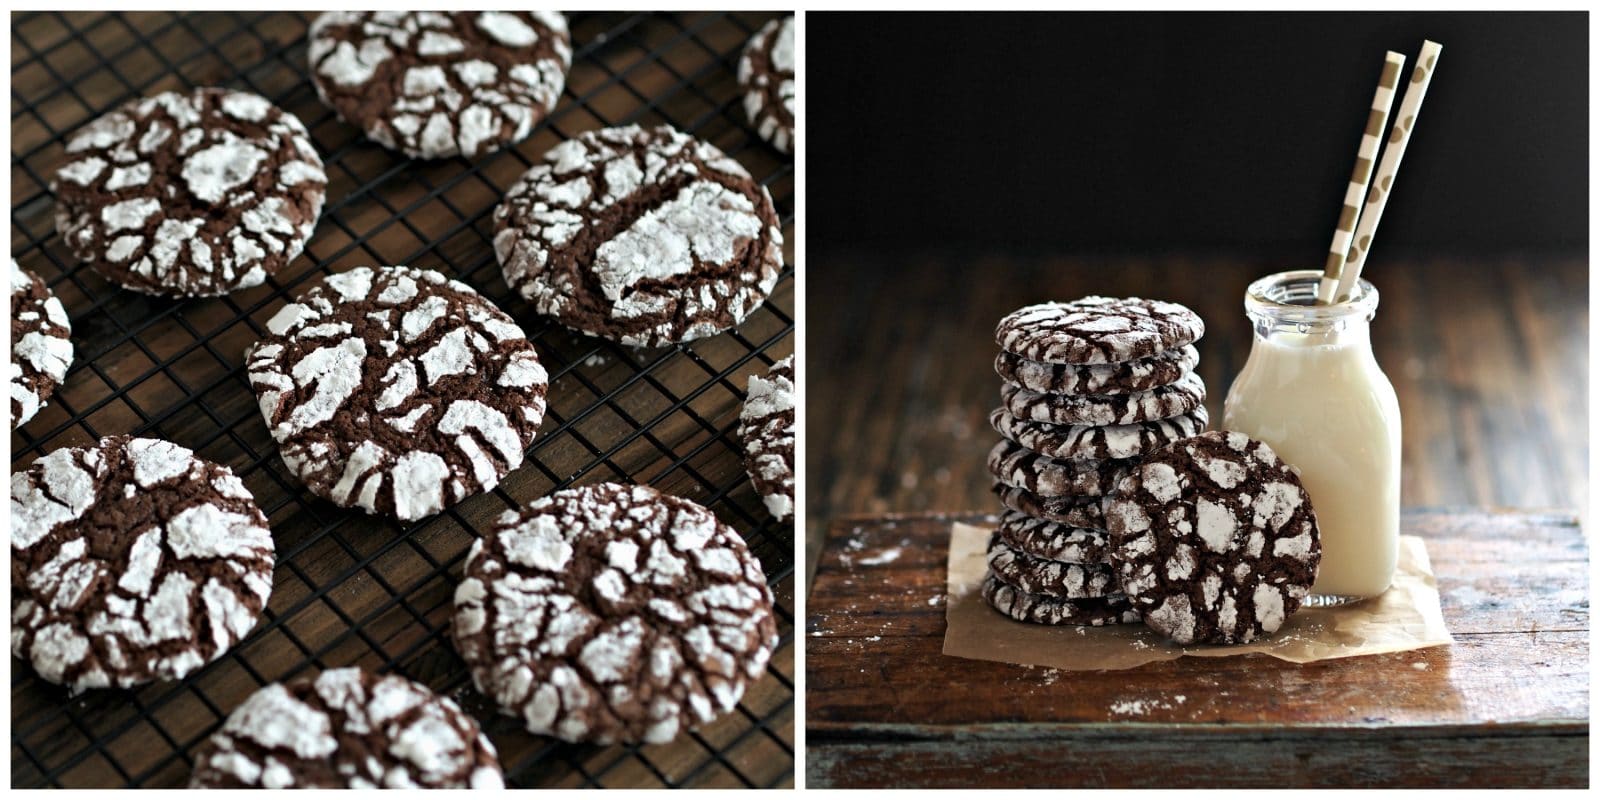 Mexican Chocolate Crinkles - add a little heat to an all-time favorite cookie. After all, "Variety is the very spice of life, that gives it all its flavor." Simply Sated